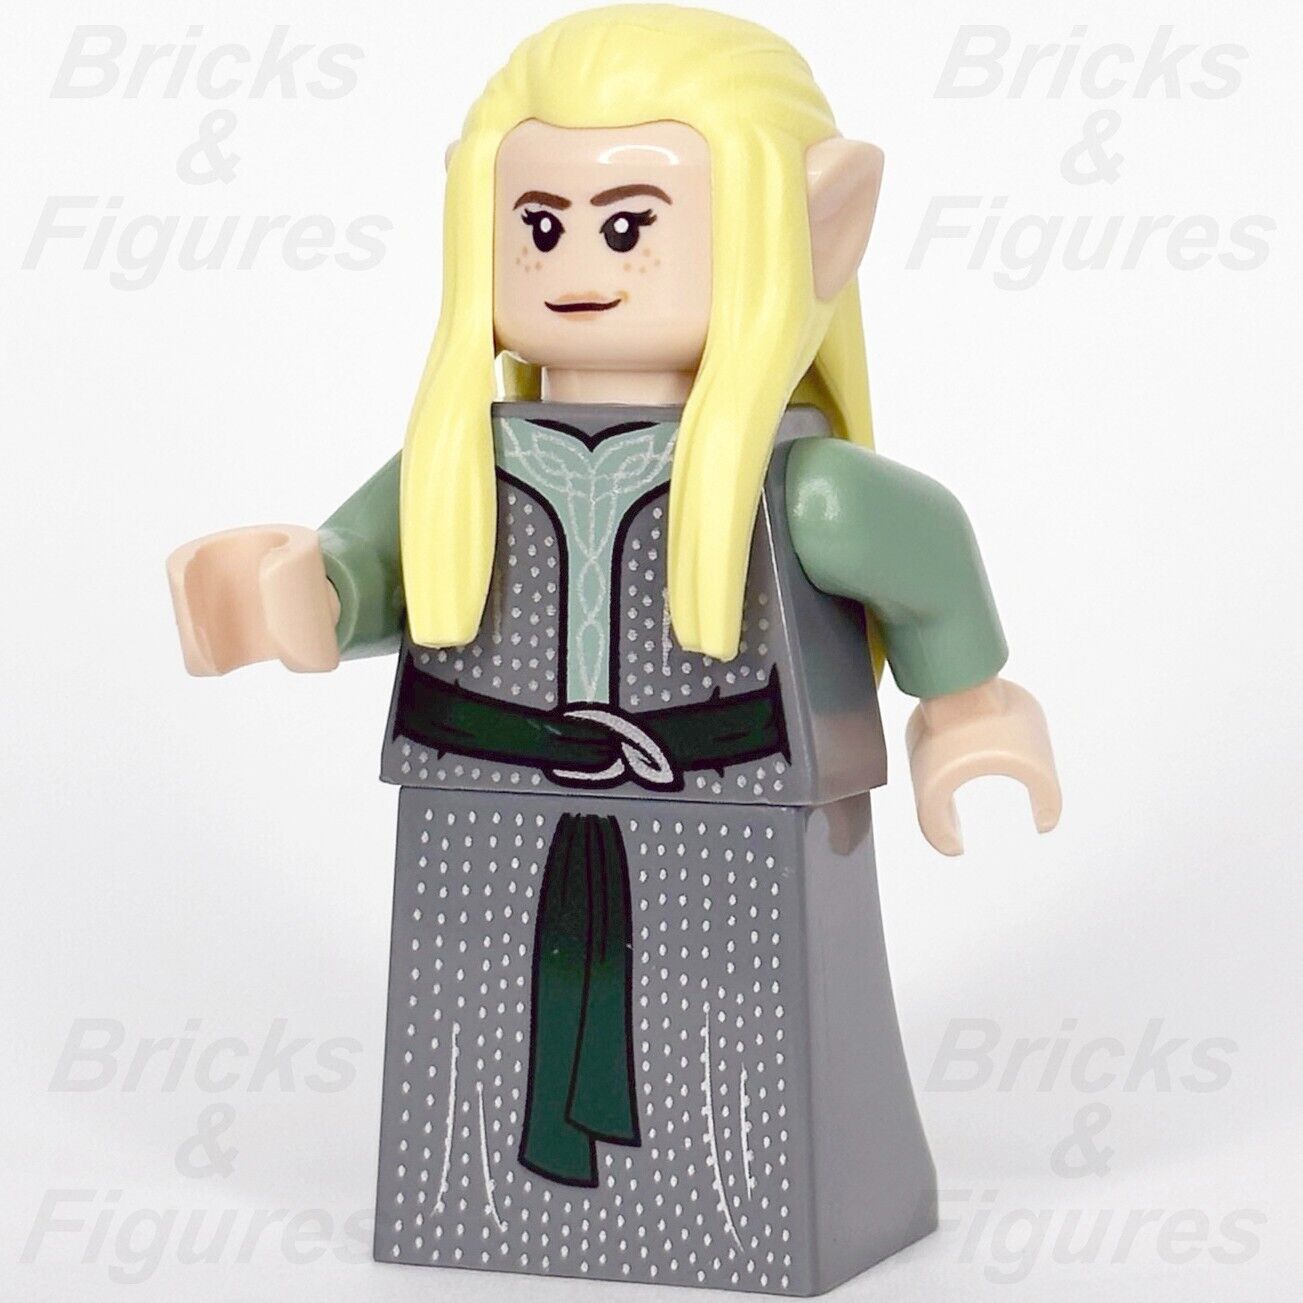 LEGO Rivendell Elf Minifigure The Hobbit & The Lord of the Rings 10316 lor120